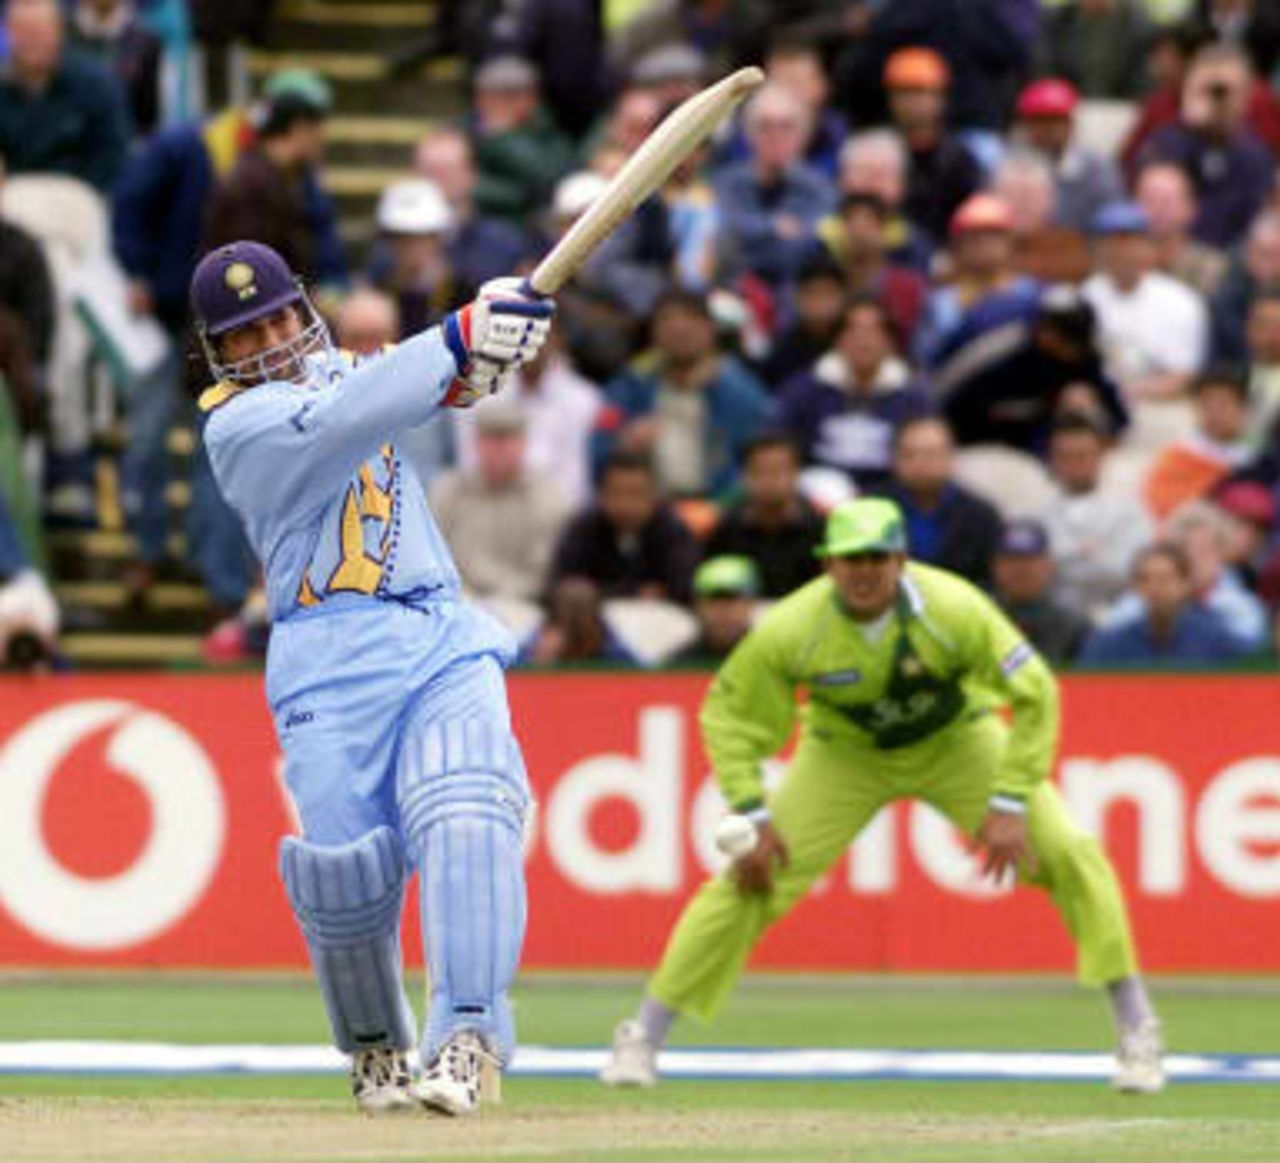 India's opening batsman Sachin Tendulkar (L) hits a four off Shoaib Akhtar 08 June 1999, during the Cricket World Cup match at Old Trafford, Manchester